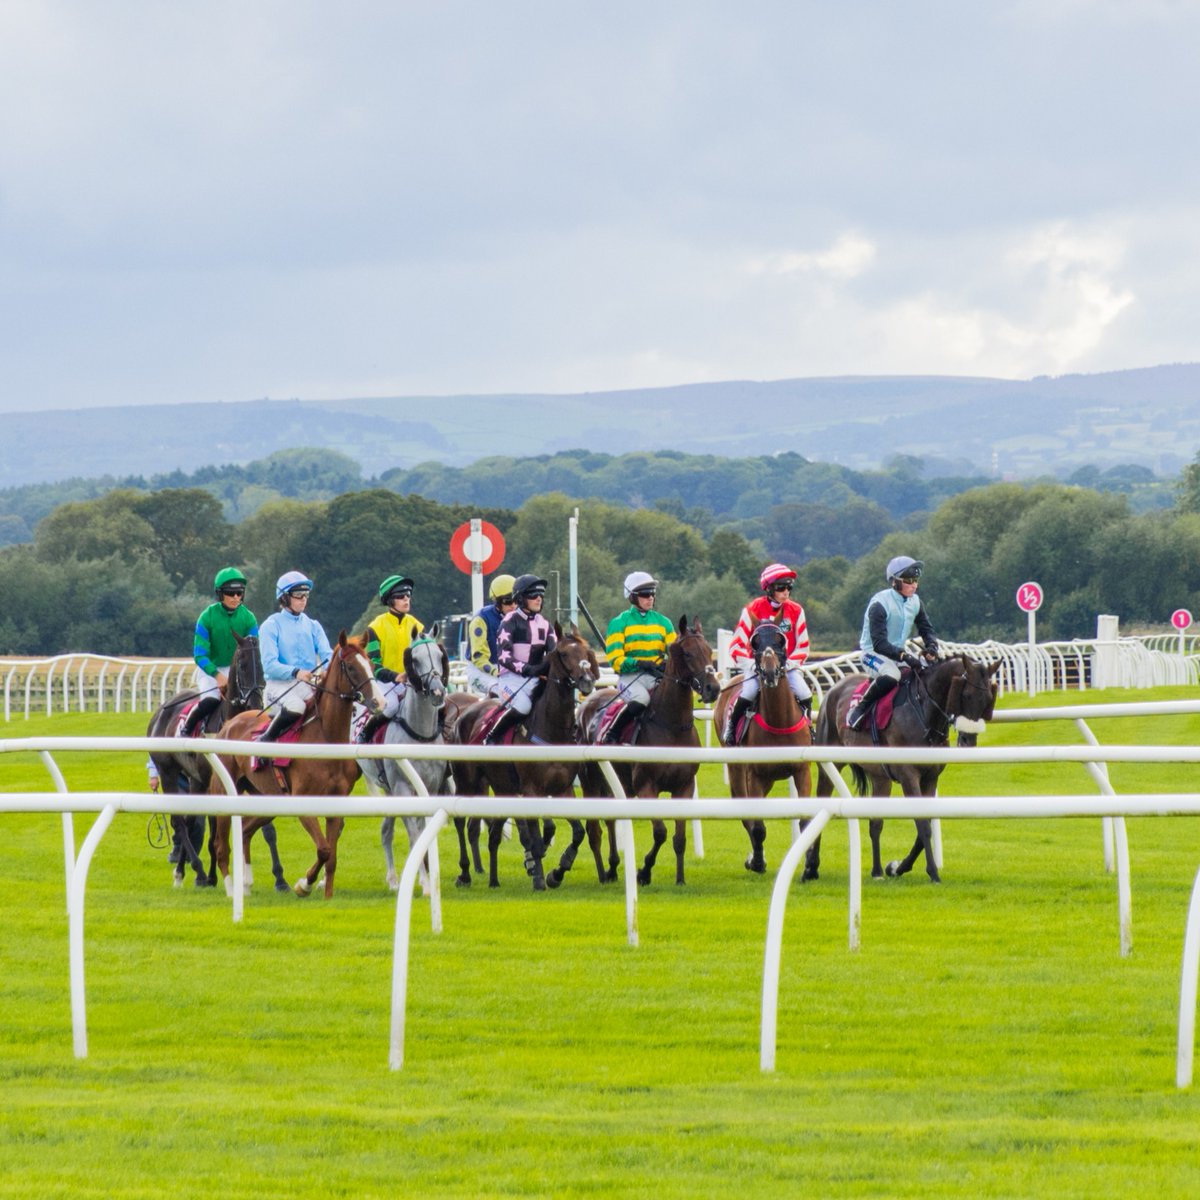 What's included in our £30 Punters Package? 🎟️Paddock Enclosure admission 🍴Fish & chips 📖Racecard 🍷Drink voucher Book your package & make a 25% saving today💰 Get yours today👇 bit.ly/46pvEN3